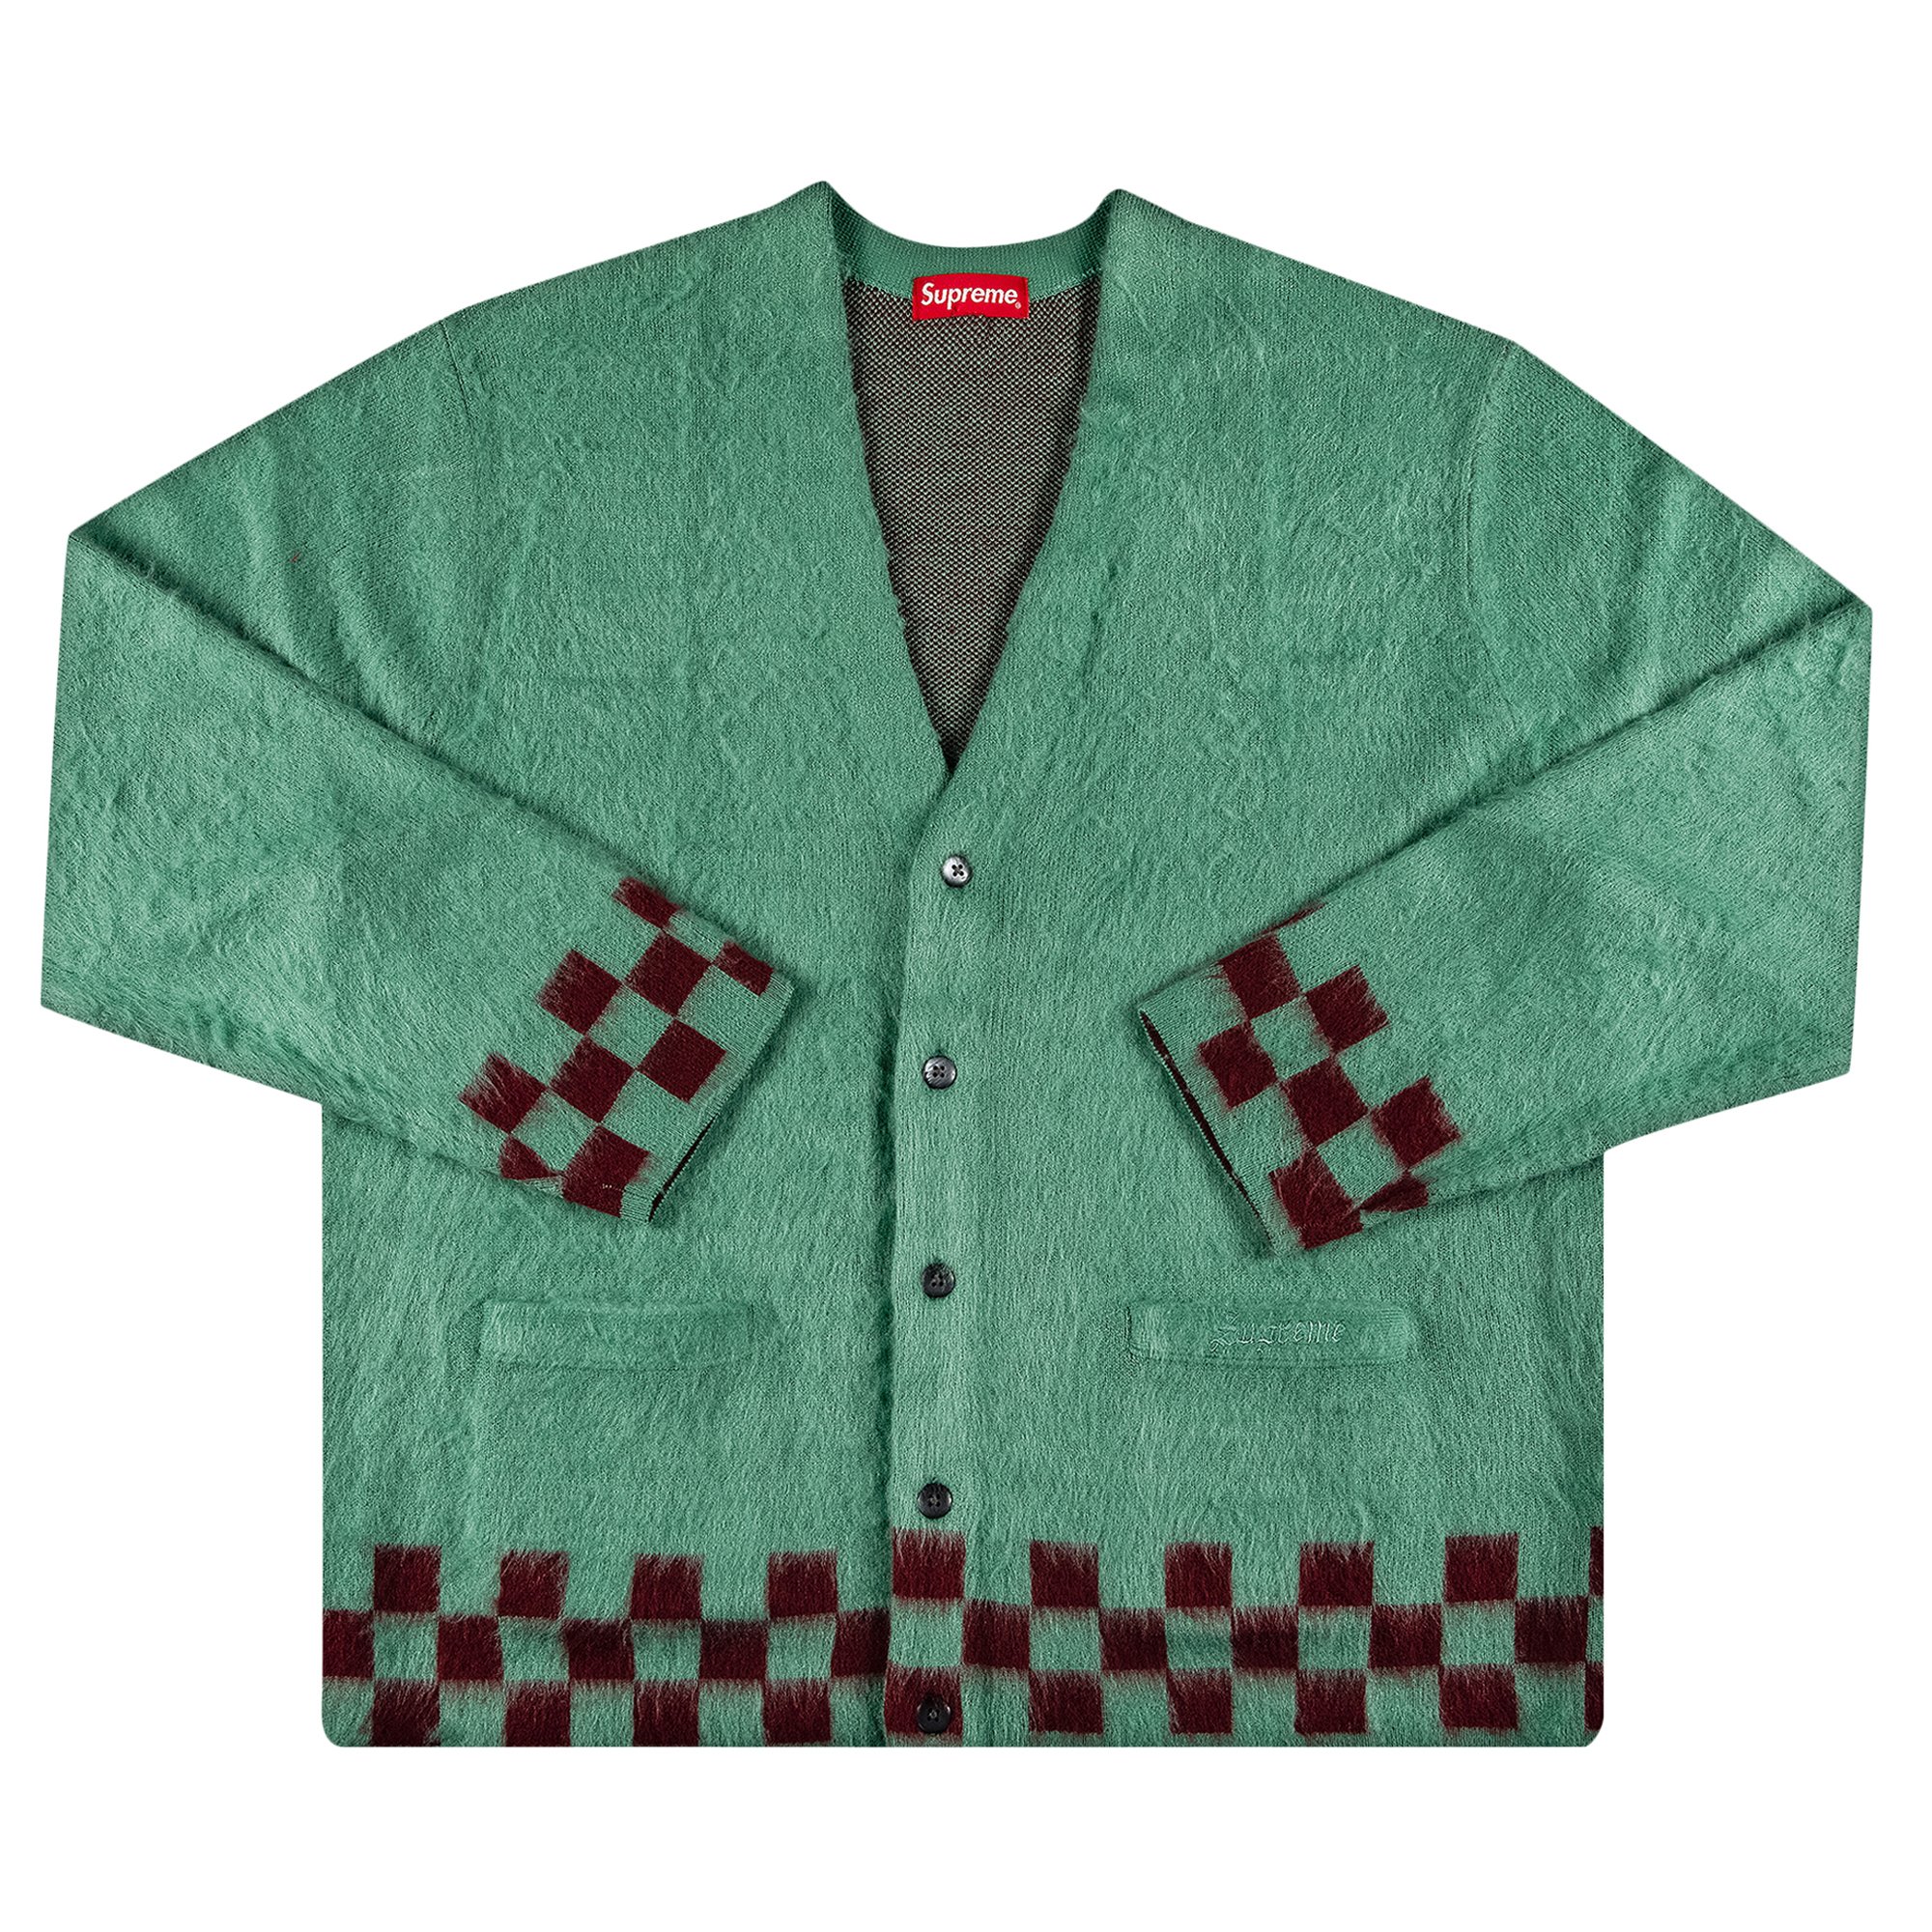 Buy Supreme Brushed Checkerboard Cardigan 'Mint' - SS21SK17 MINT | GOAT